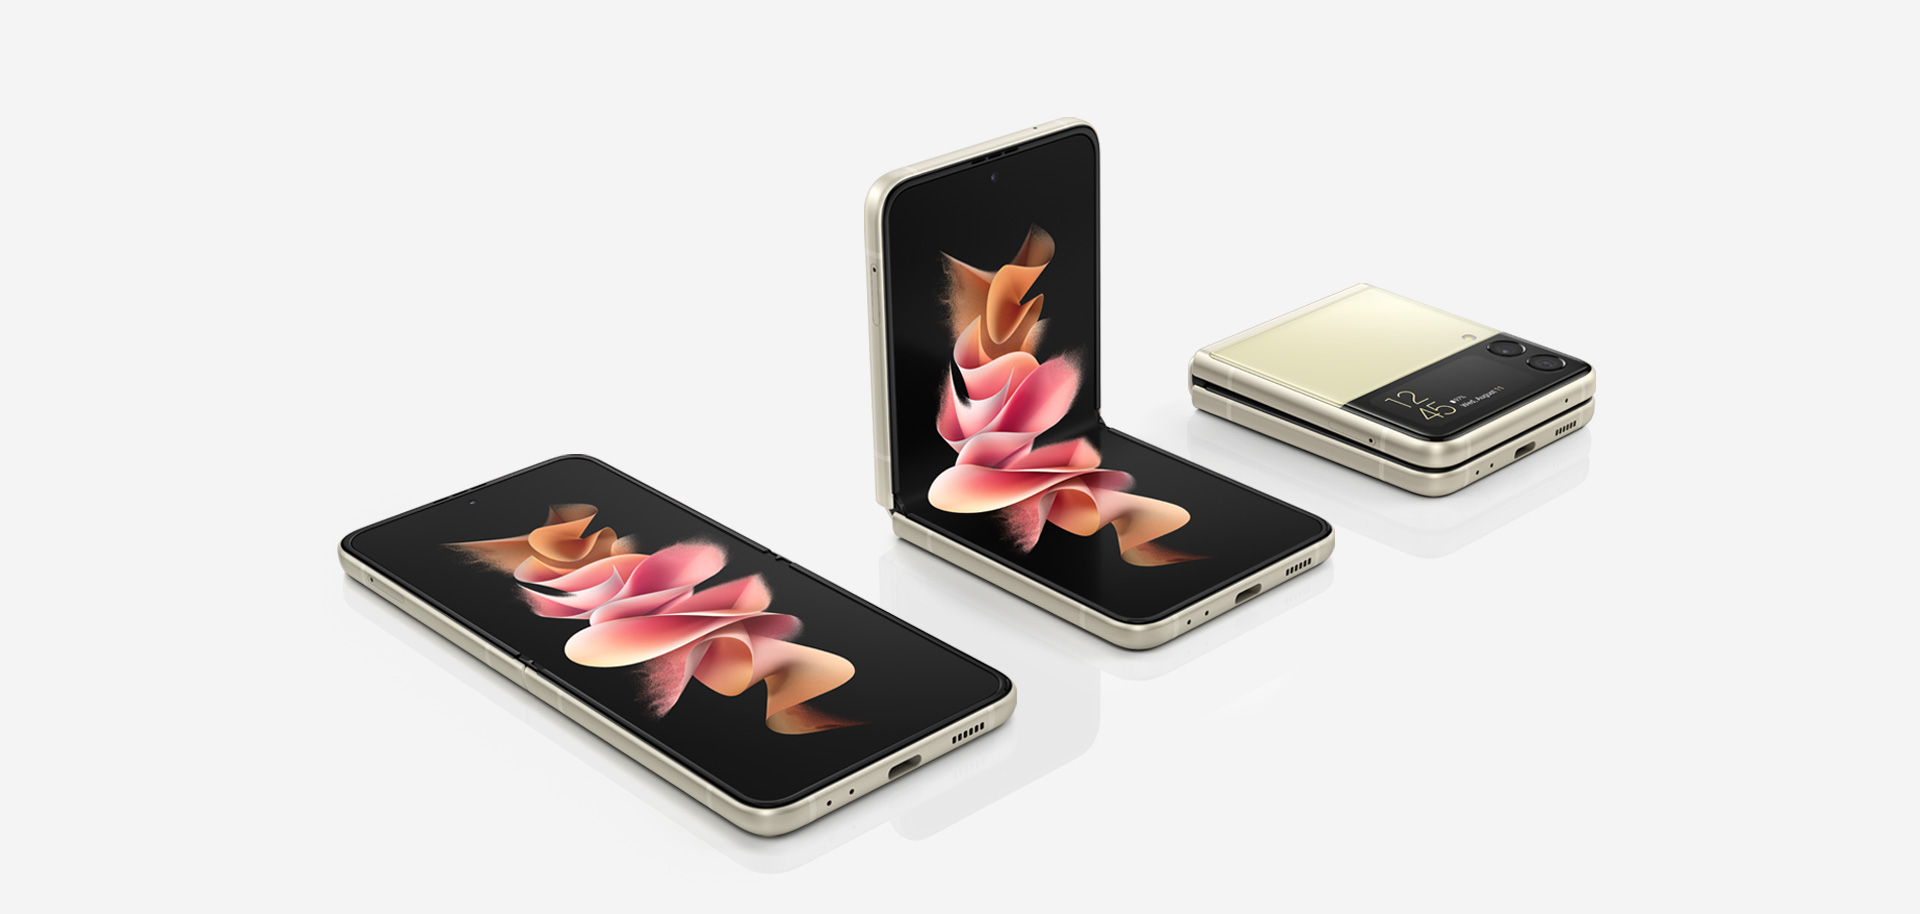 Four Galaxy Z Flip3 5G phones, stacked on top of each other. Two are folded and two are in Flex mode. Each is a Bespoke Edition phone, with exclusive colors and options including two-tone covers and black or silver hinge.